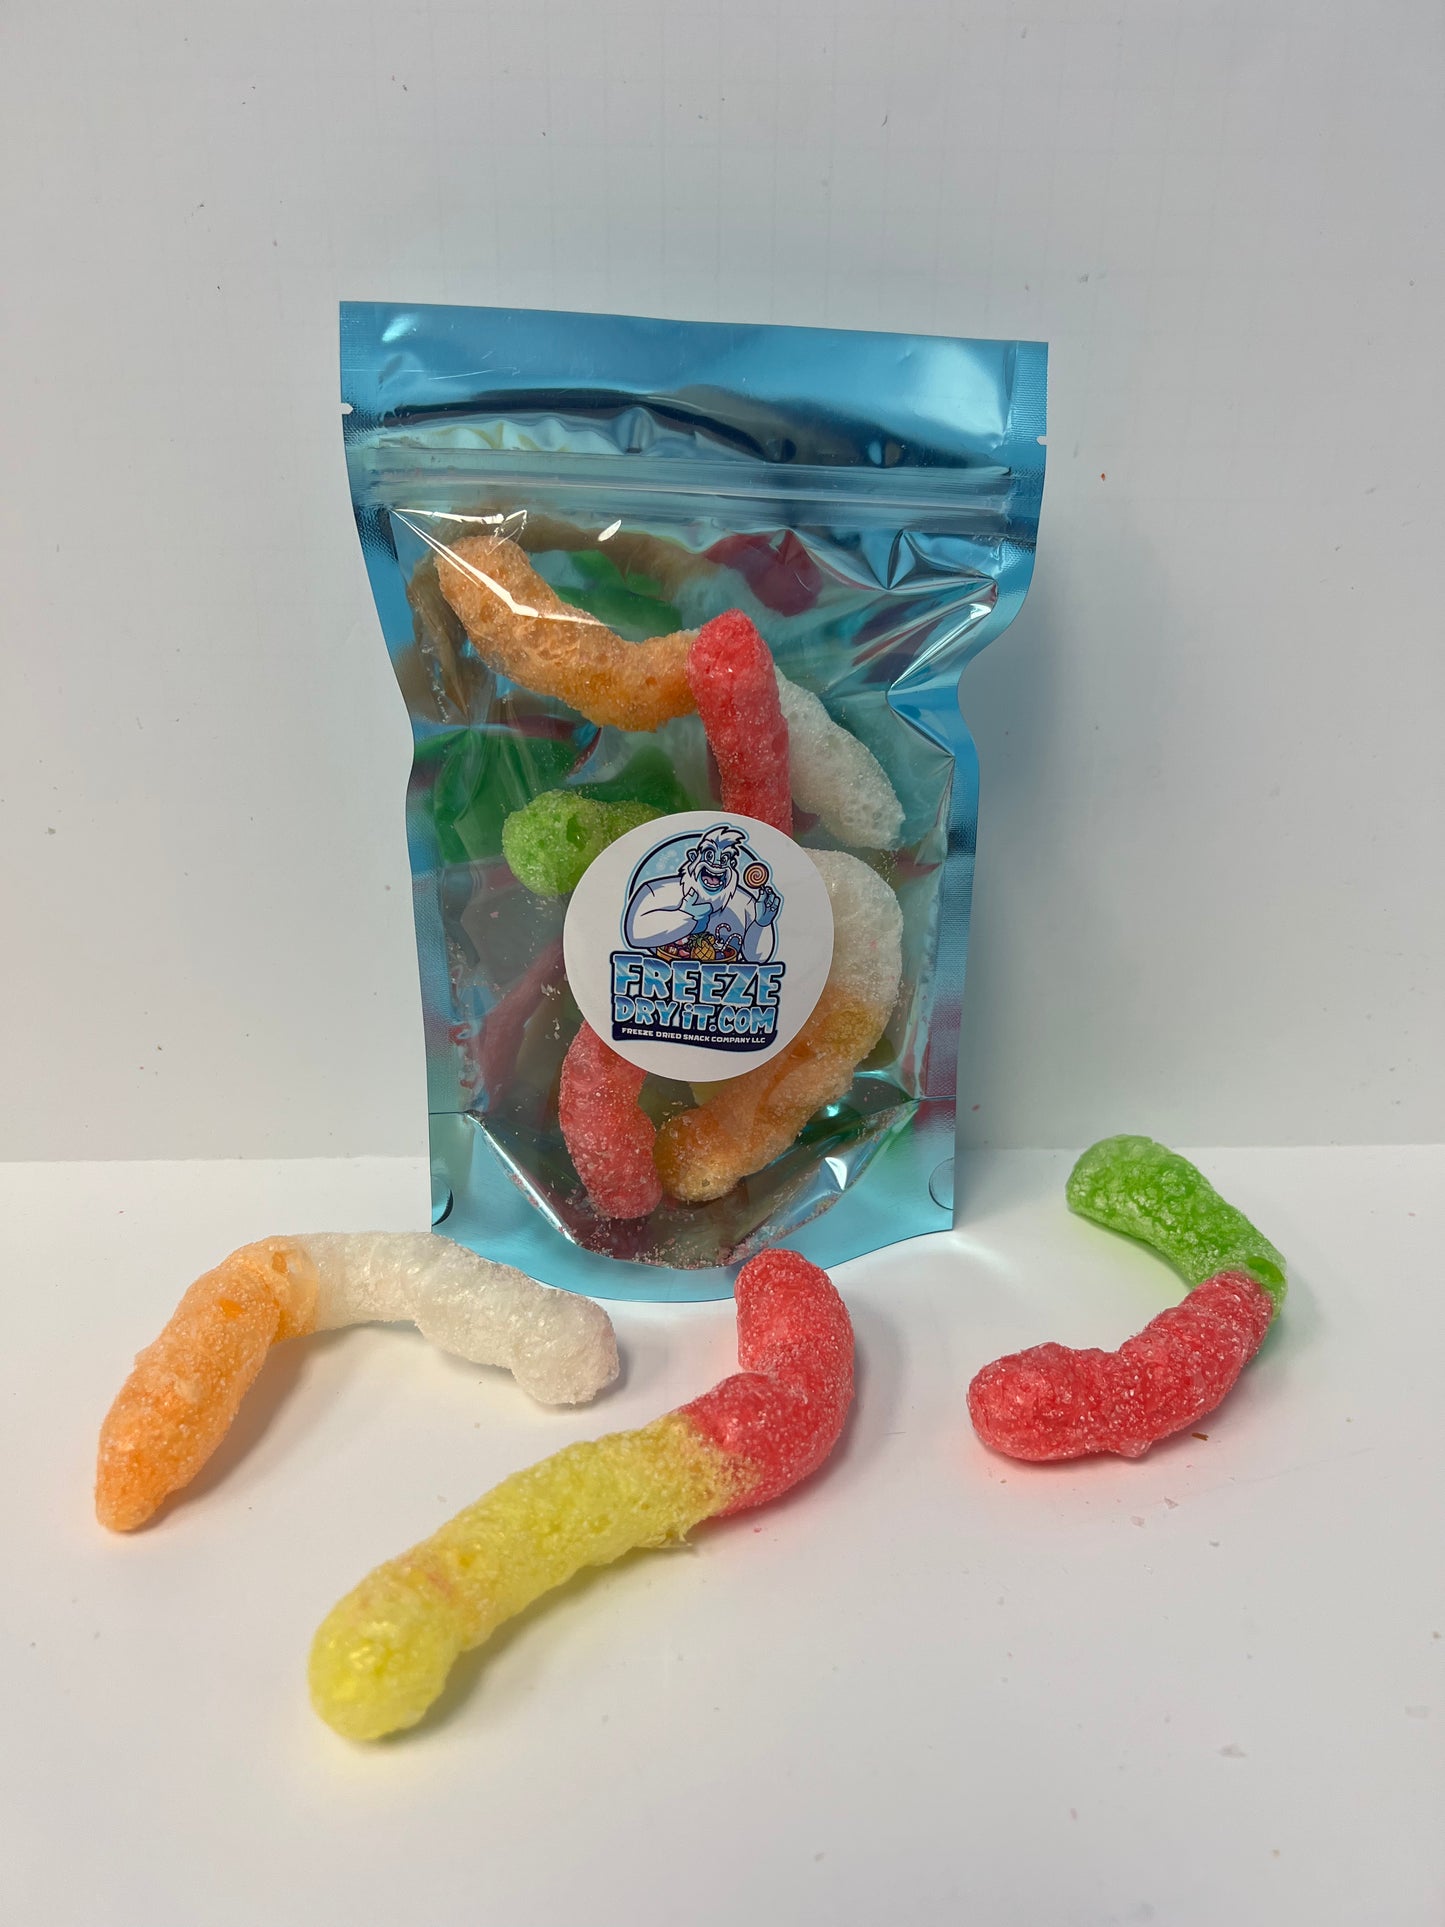 Albanese Sour Gummy Worms